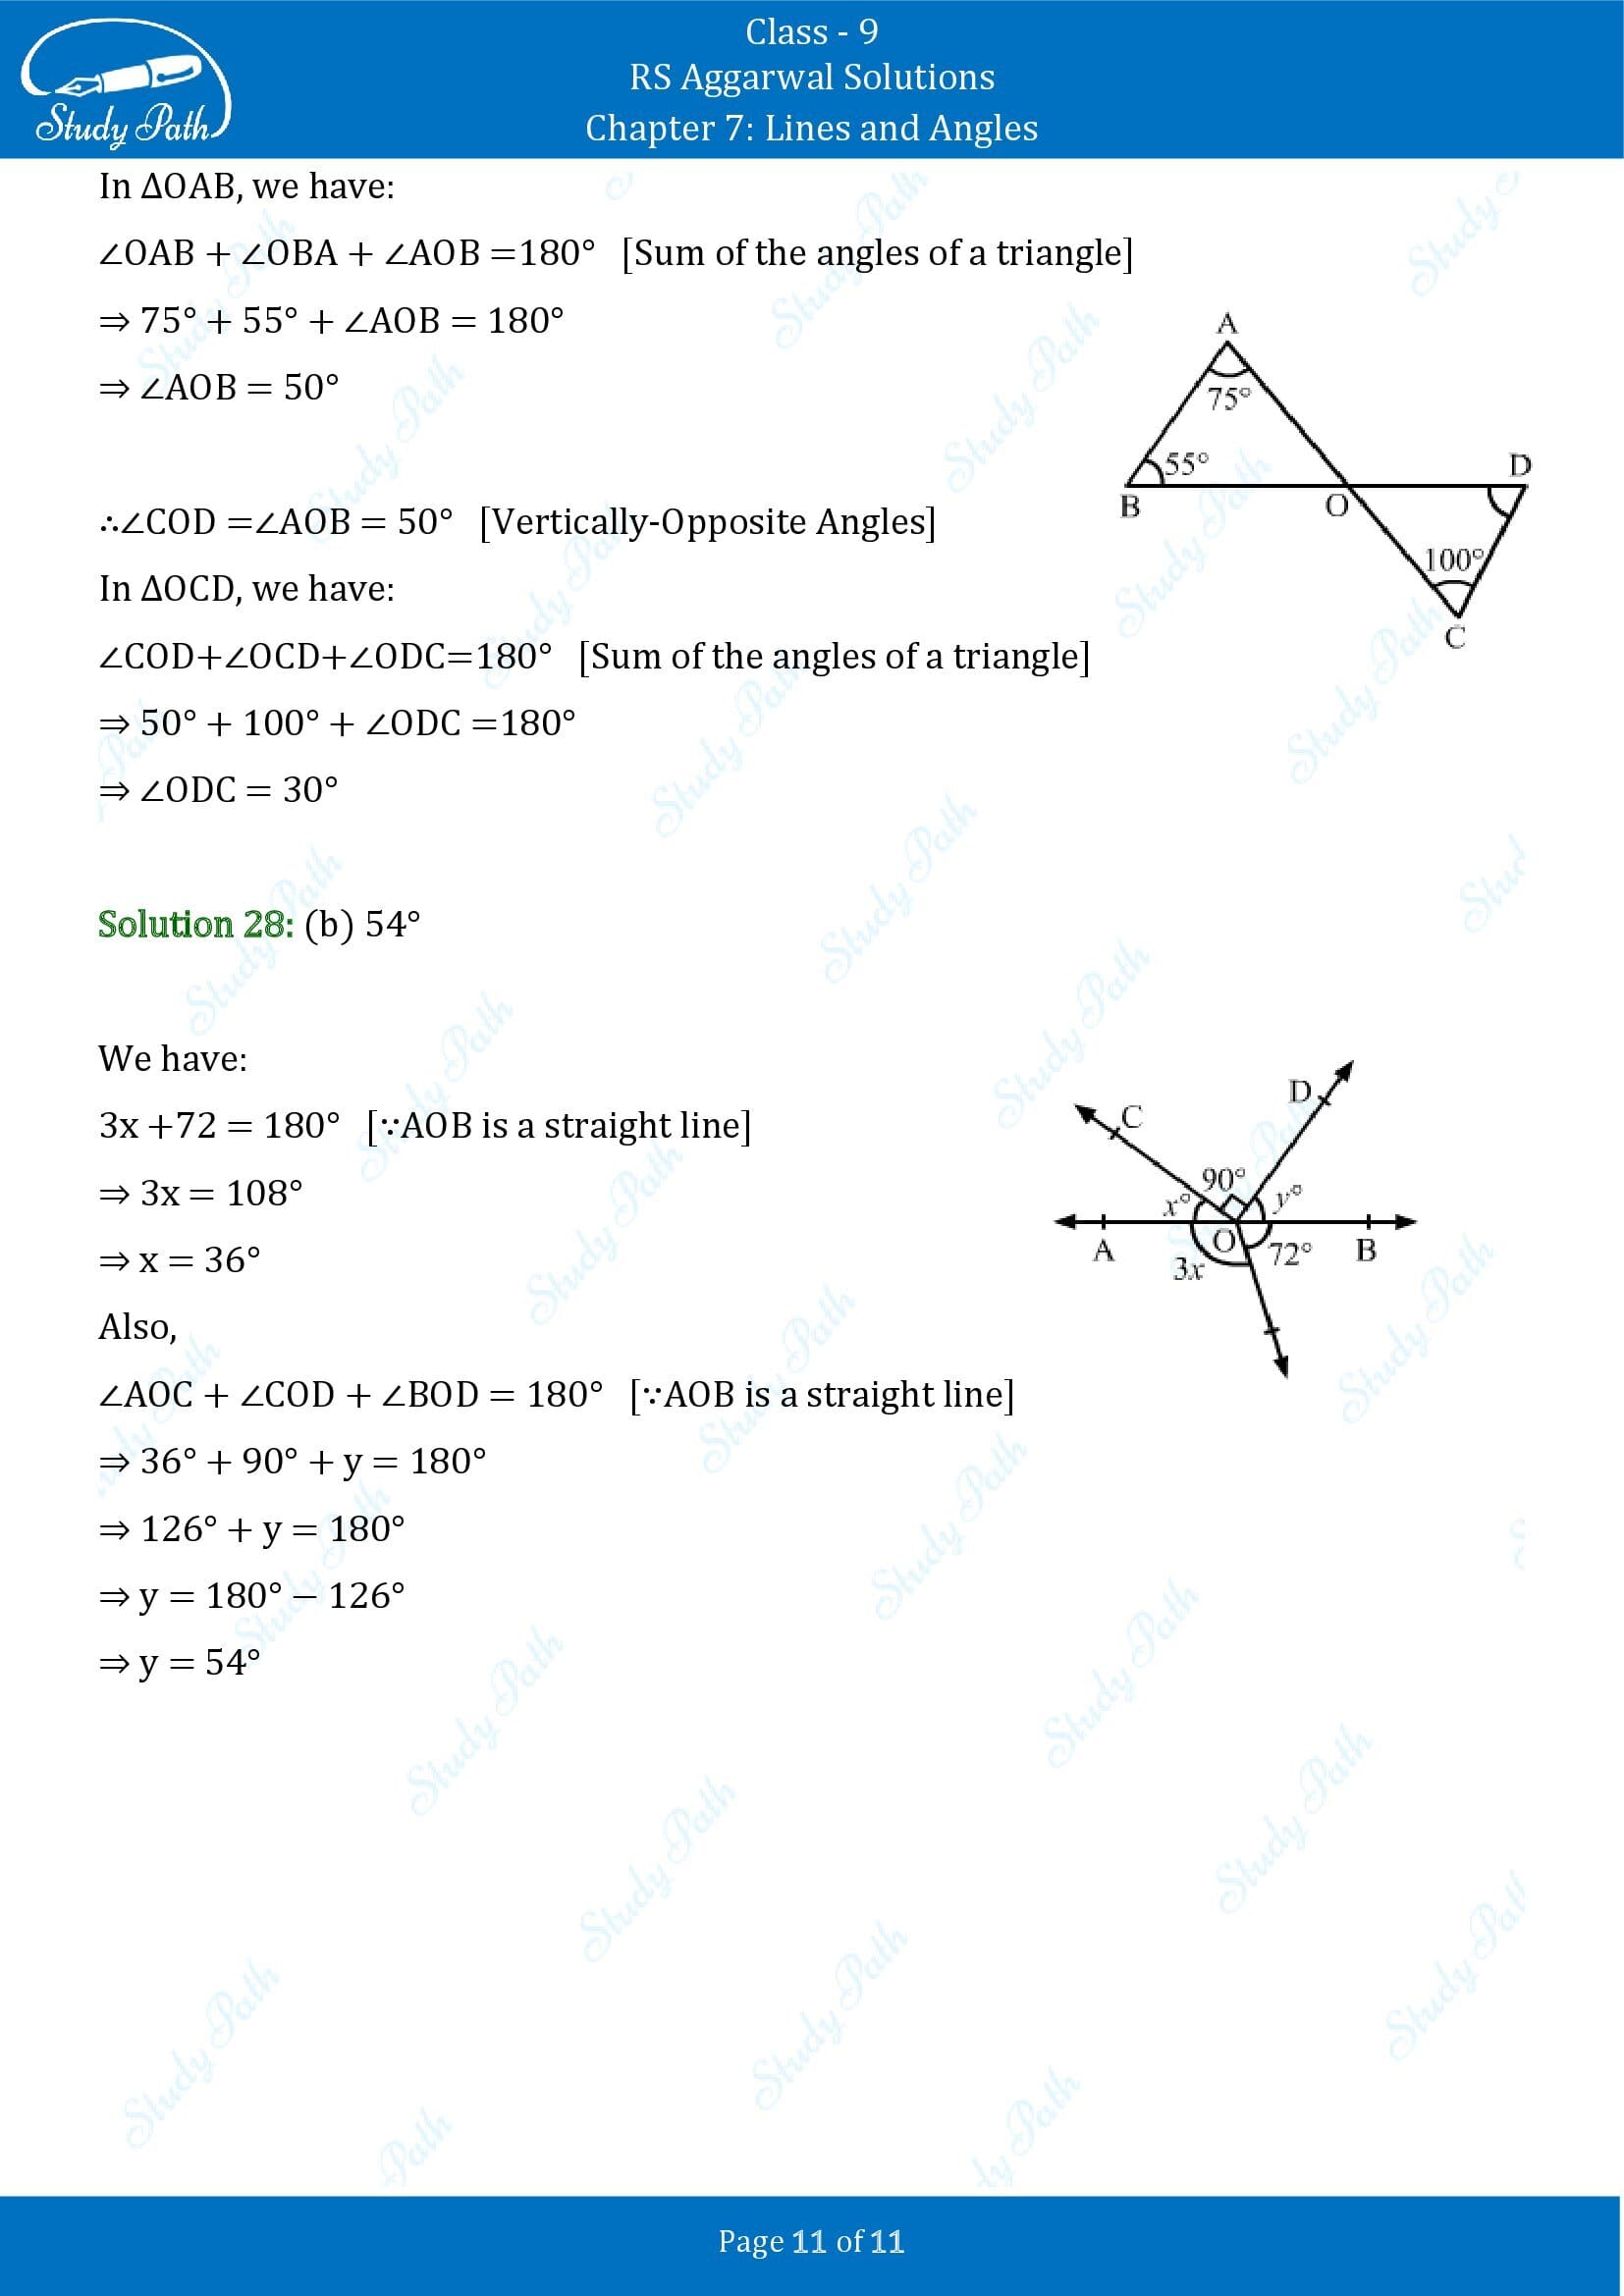 RS Aggarwal Solutions Class 9 Chapter 7 Lines and Angles Multiple Choice Questions MCQs 00011